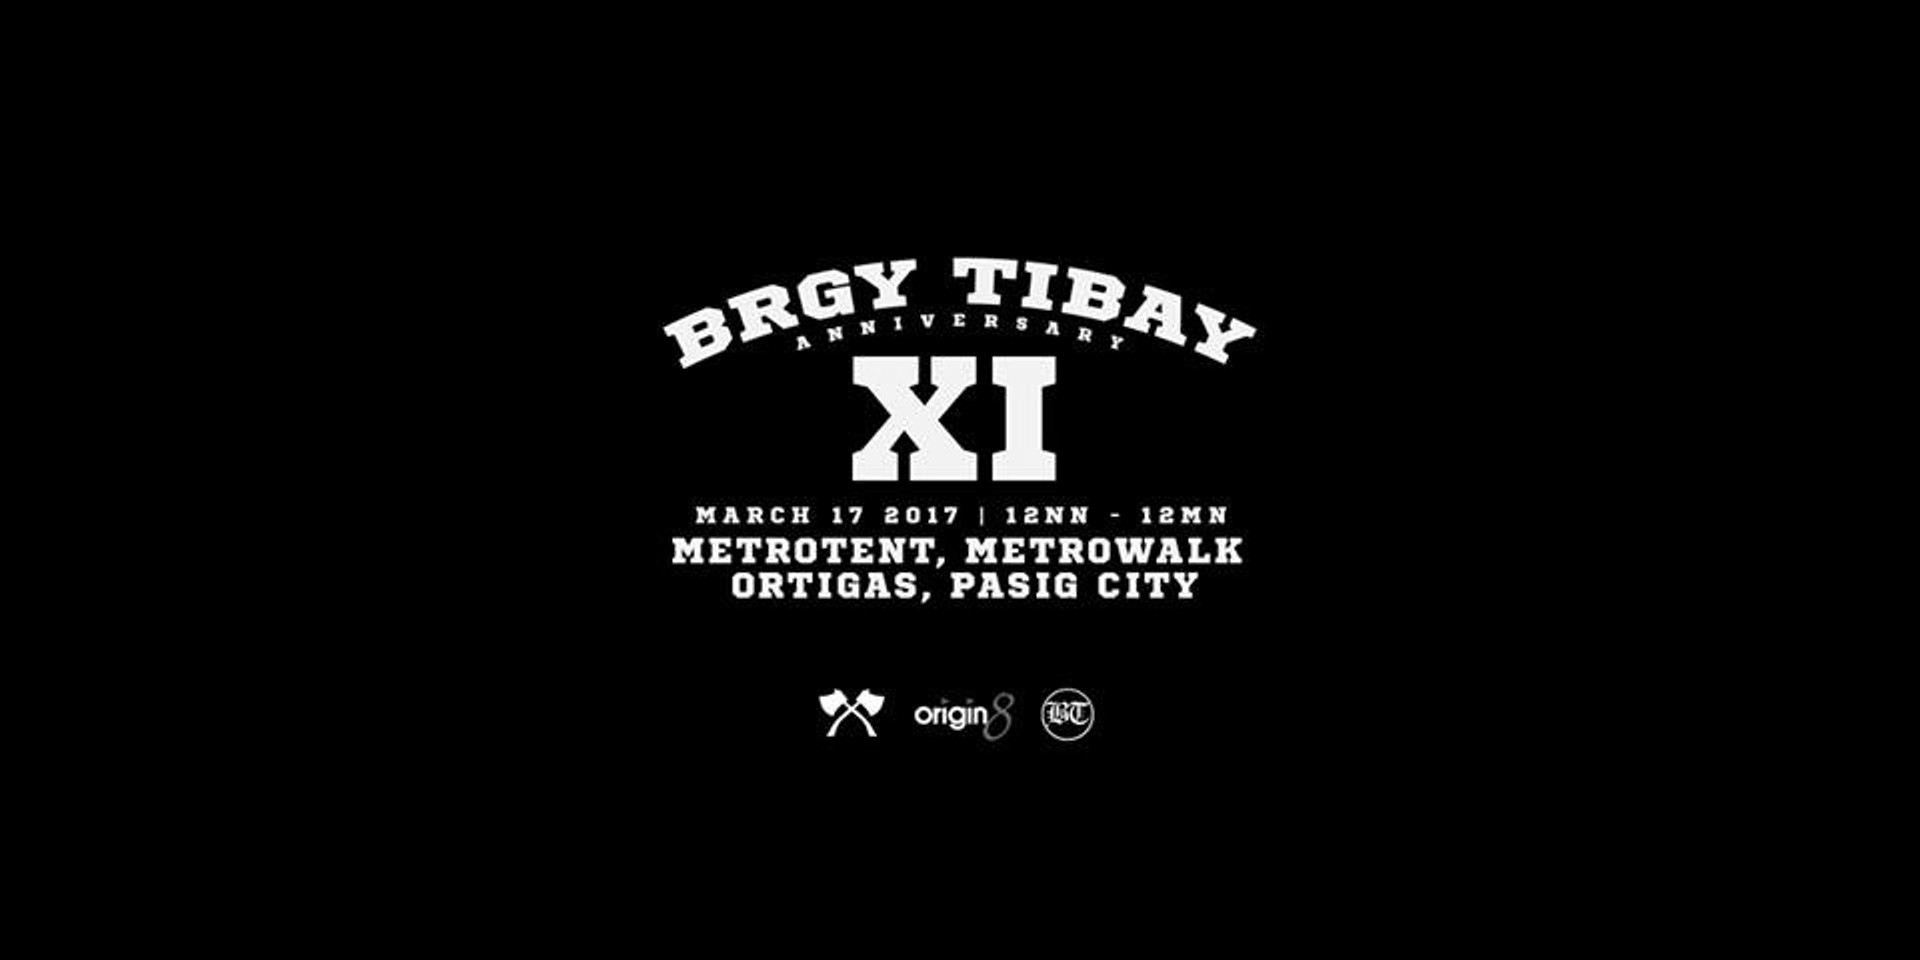 Brgy. Tibay celebrates 11th anniversary with Typecast, Greyhoundz, Franco and more